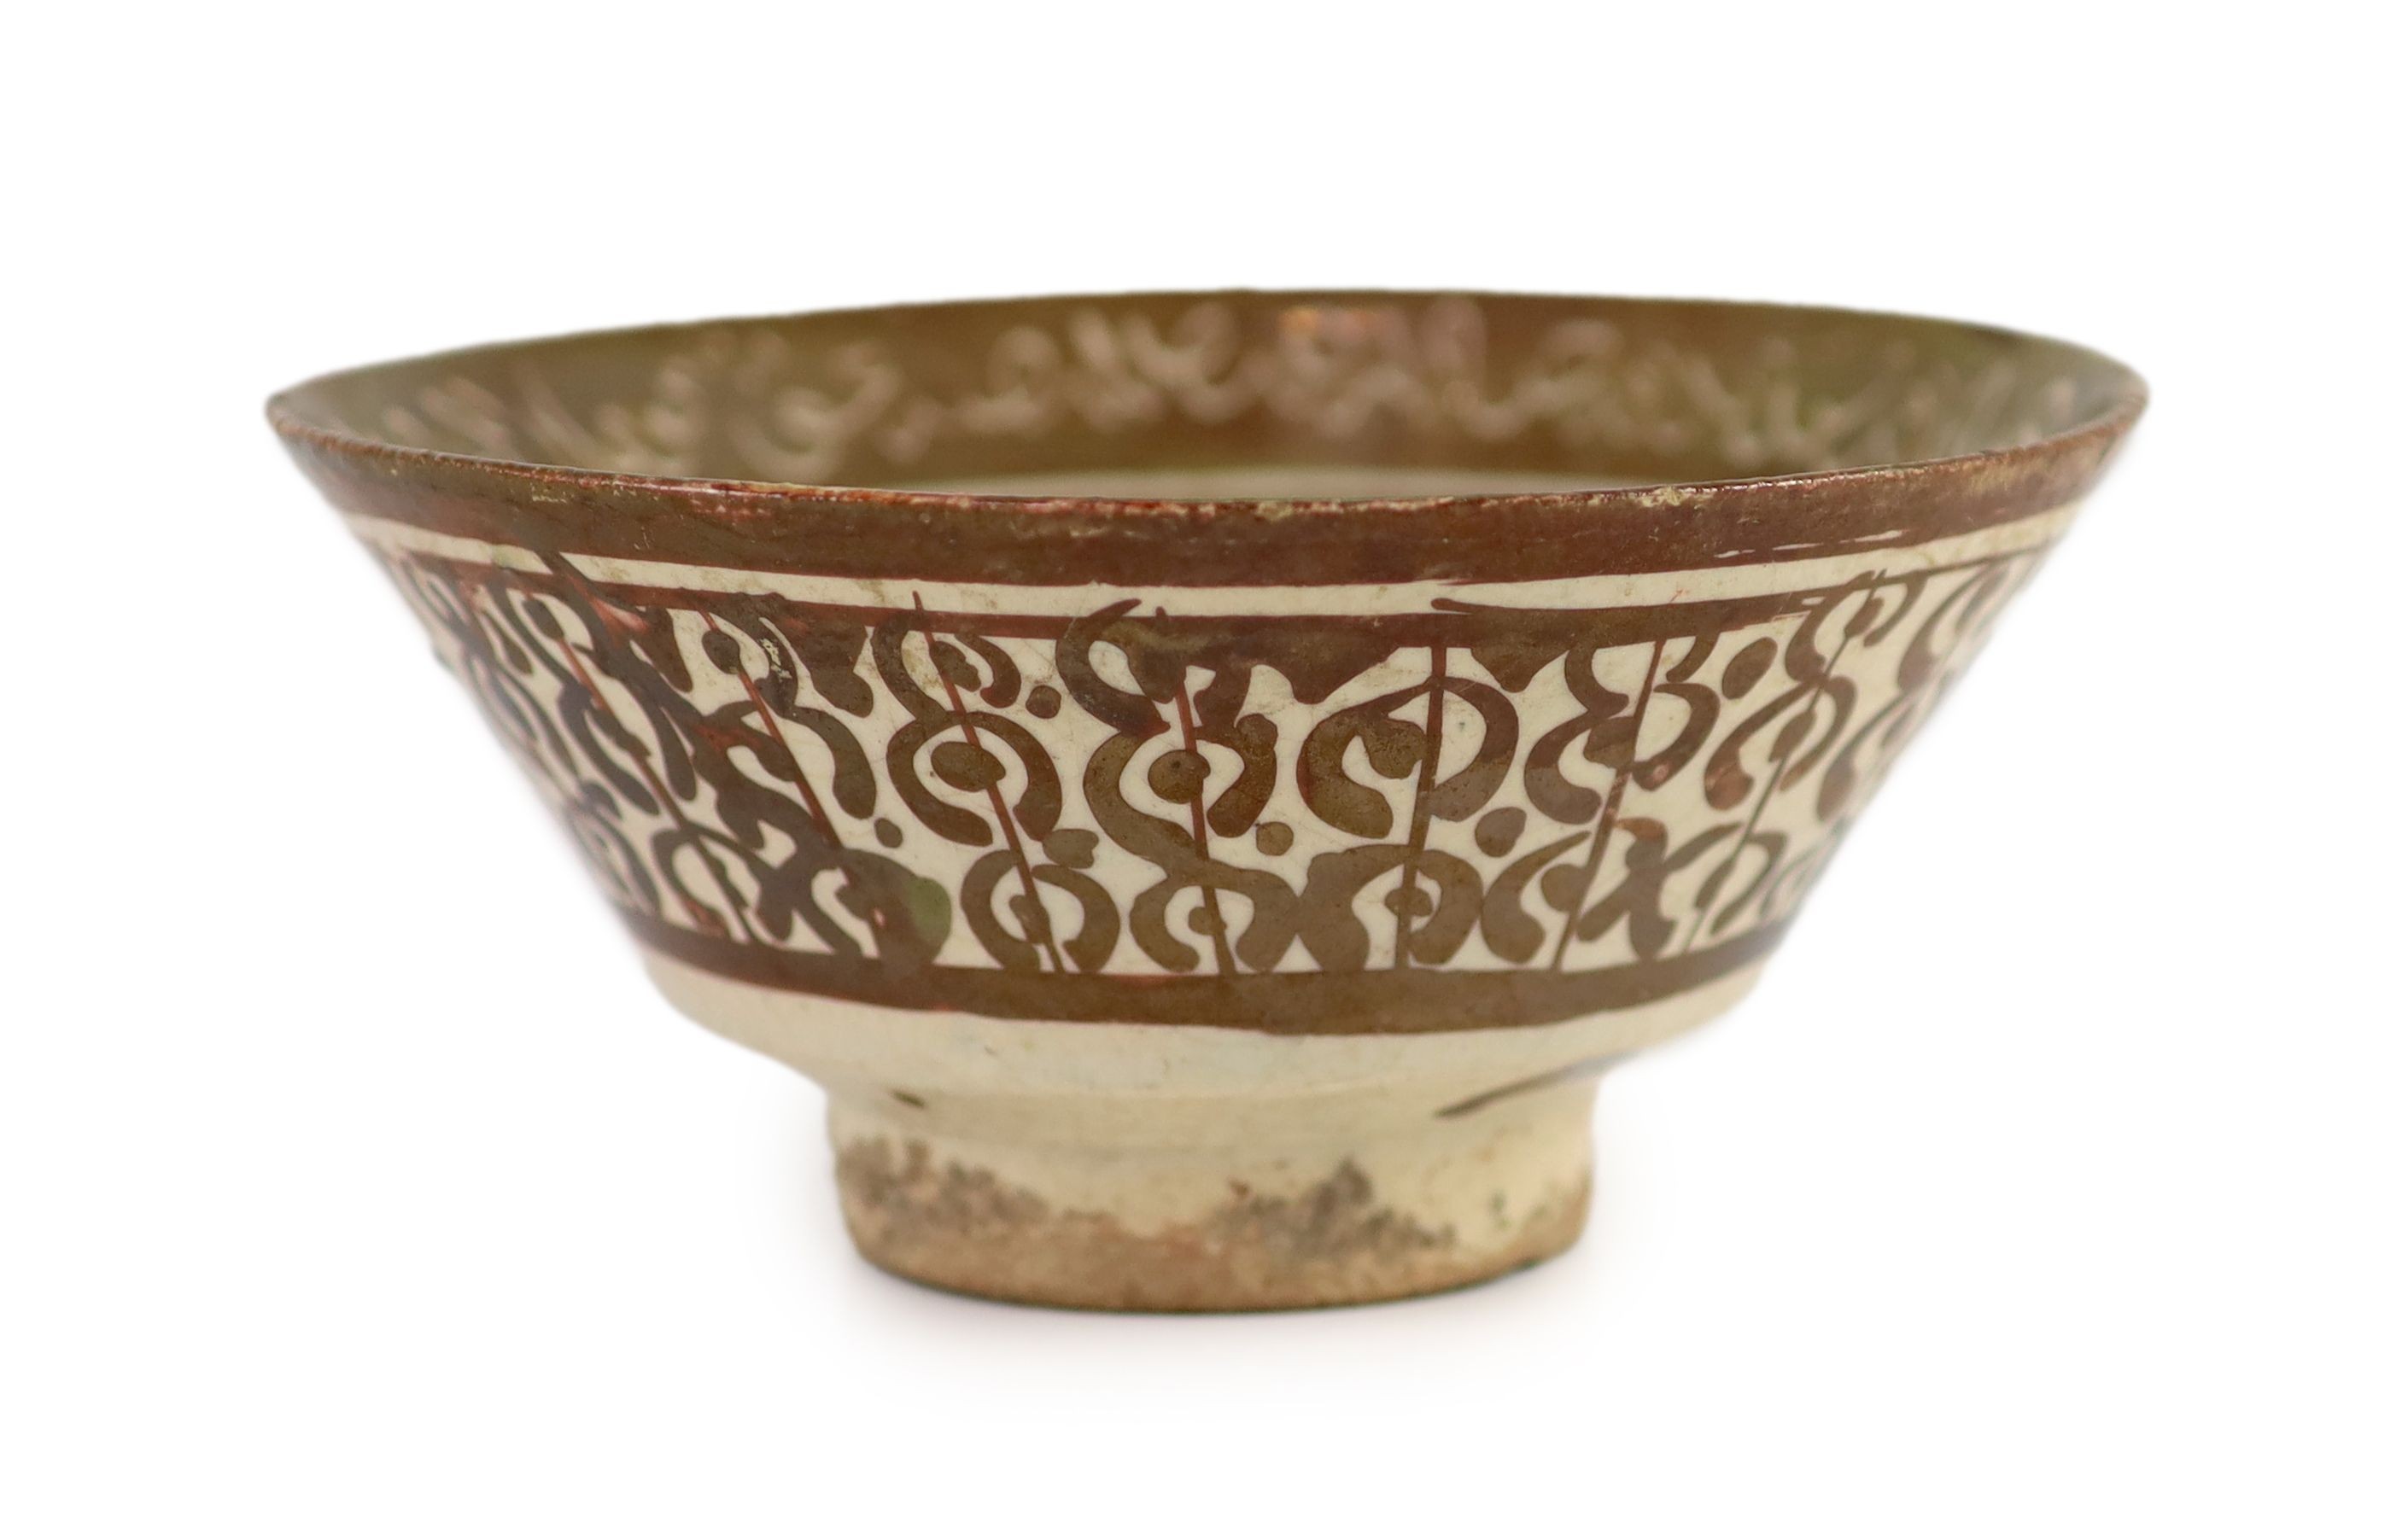 A Kashan inscribed copper lustre pottery bowl, Persia, 13th century, 16.5cm diameter